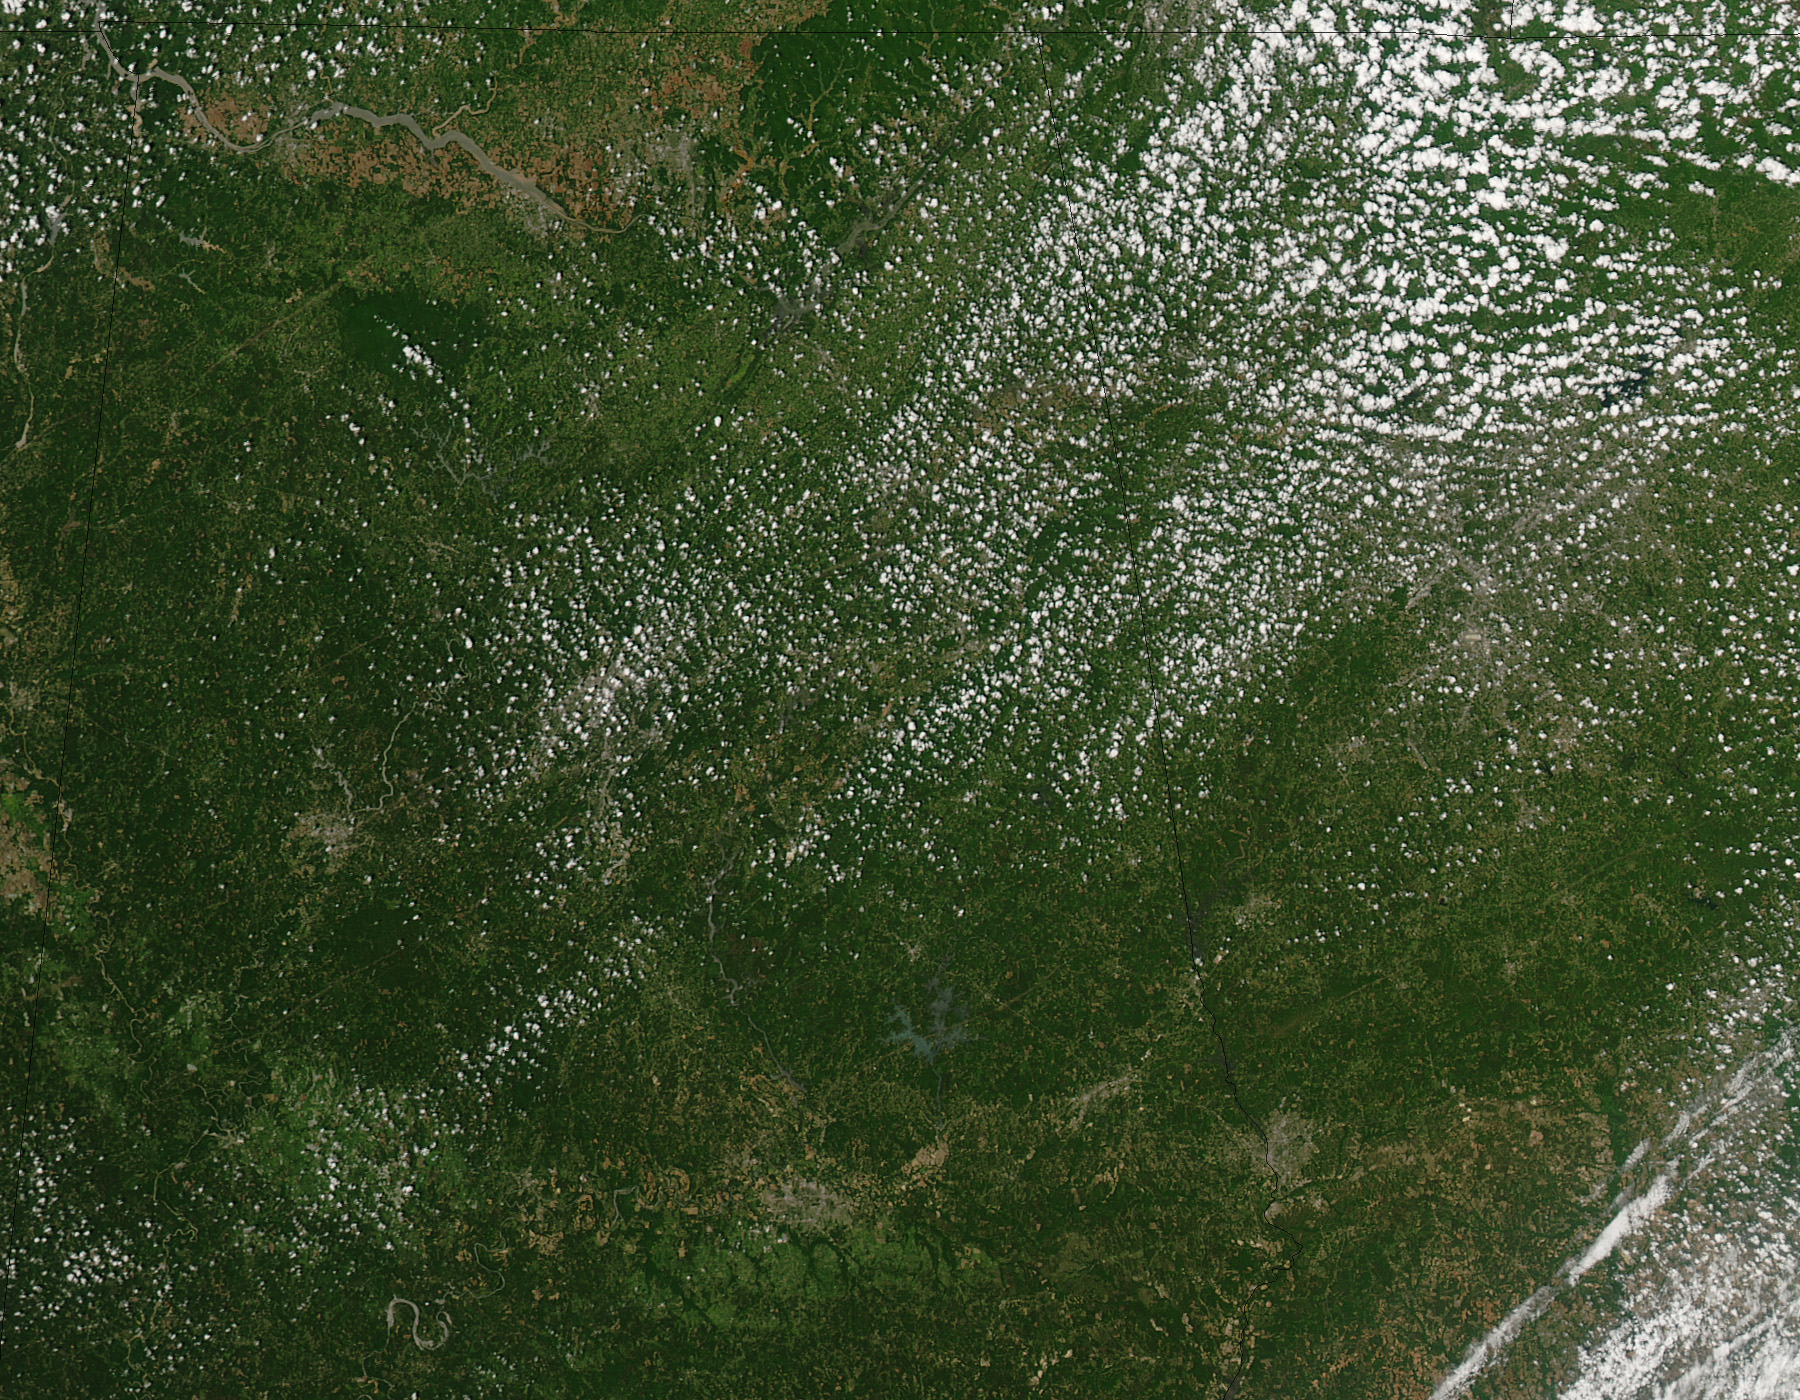 Tornado Tracks in Tuscaloosa, Alabama - related image preview